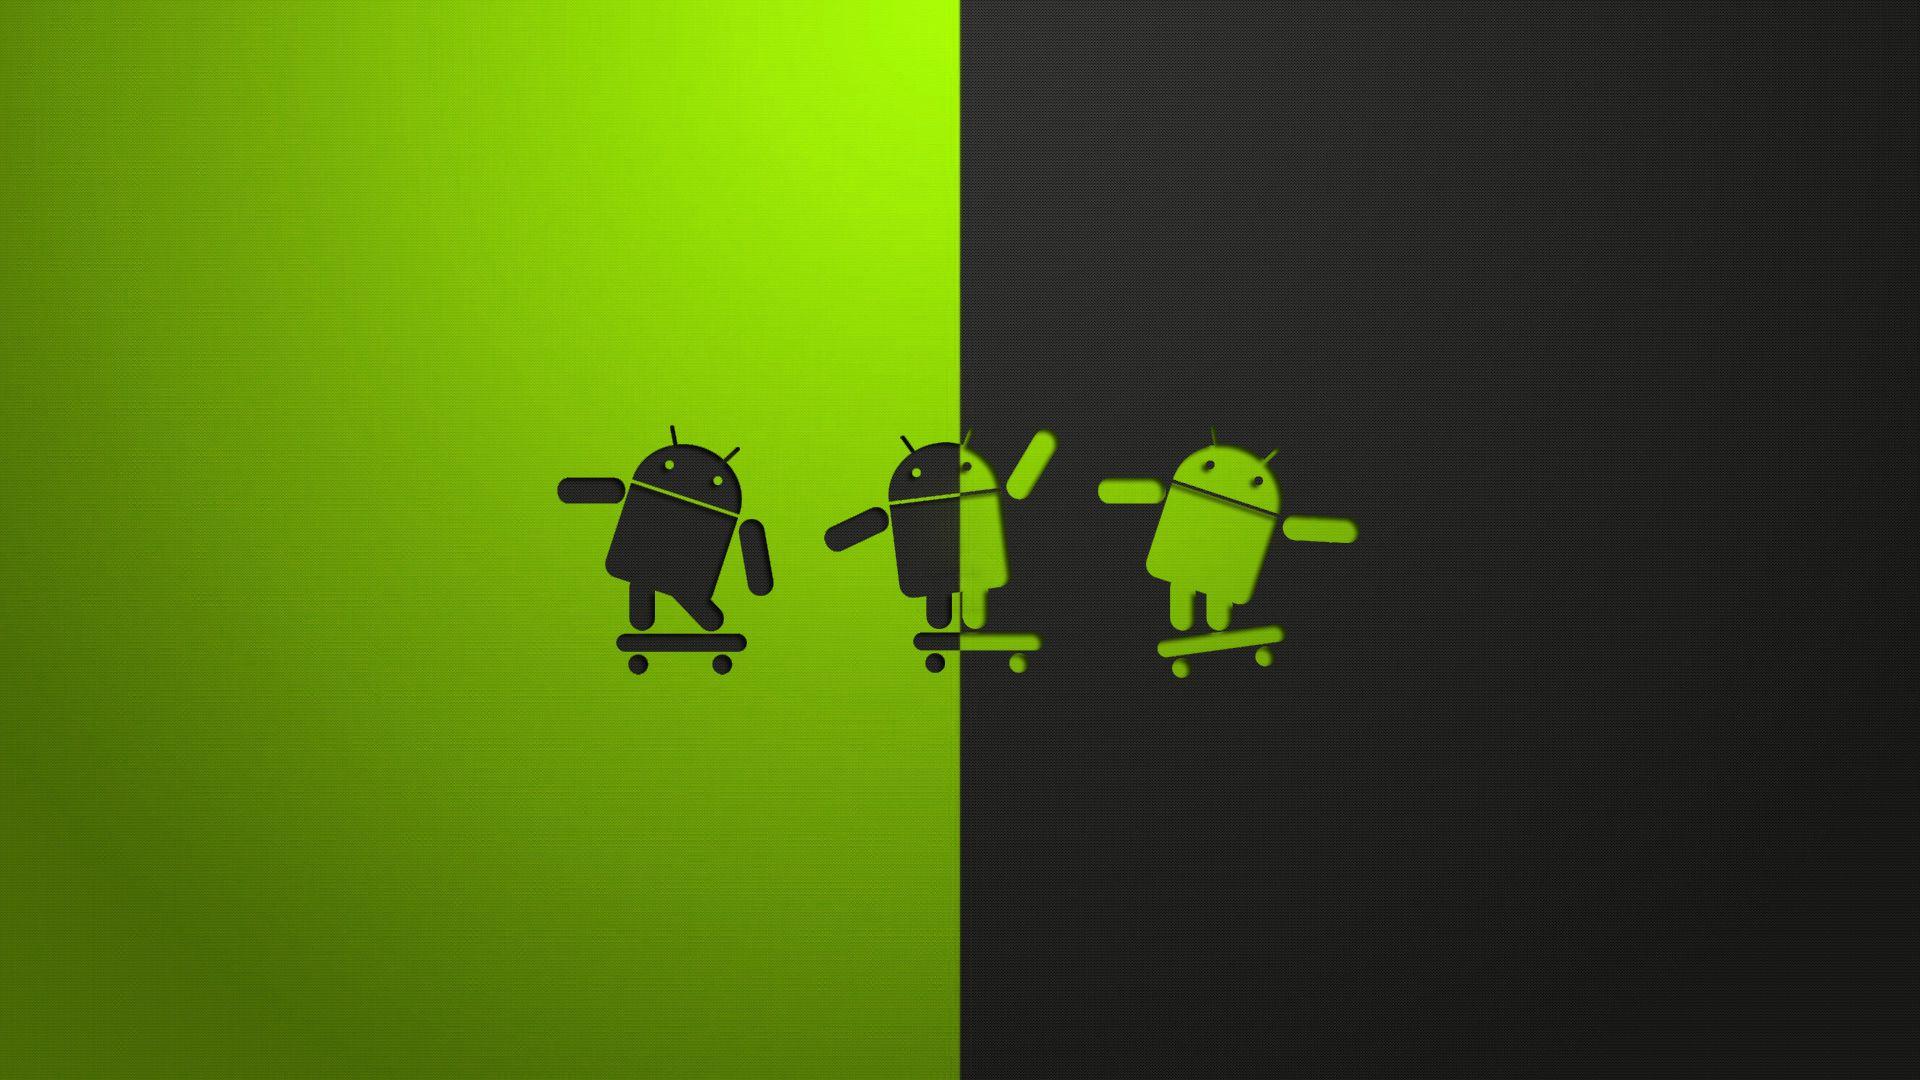 Android Wallpaper 07 - [1920 x 1080]